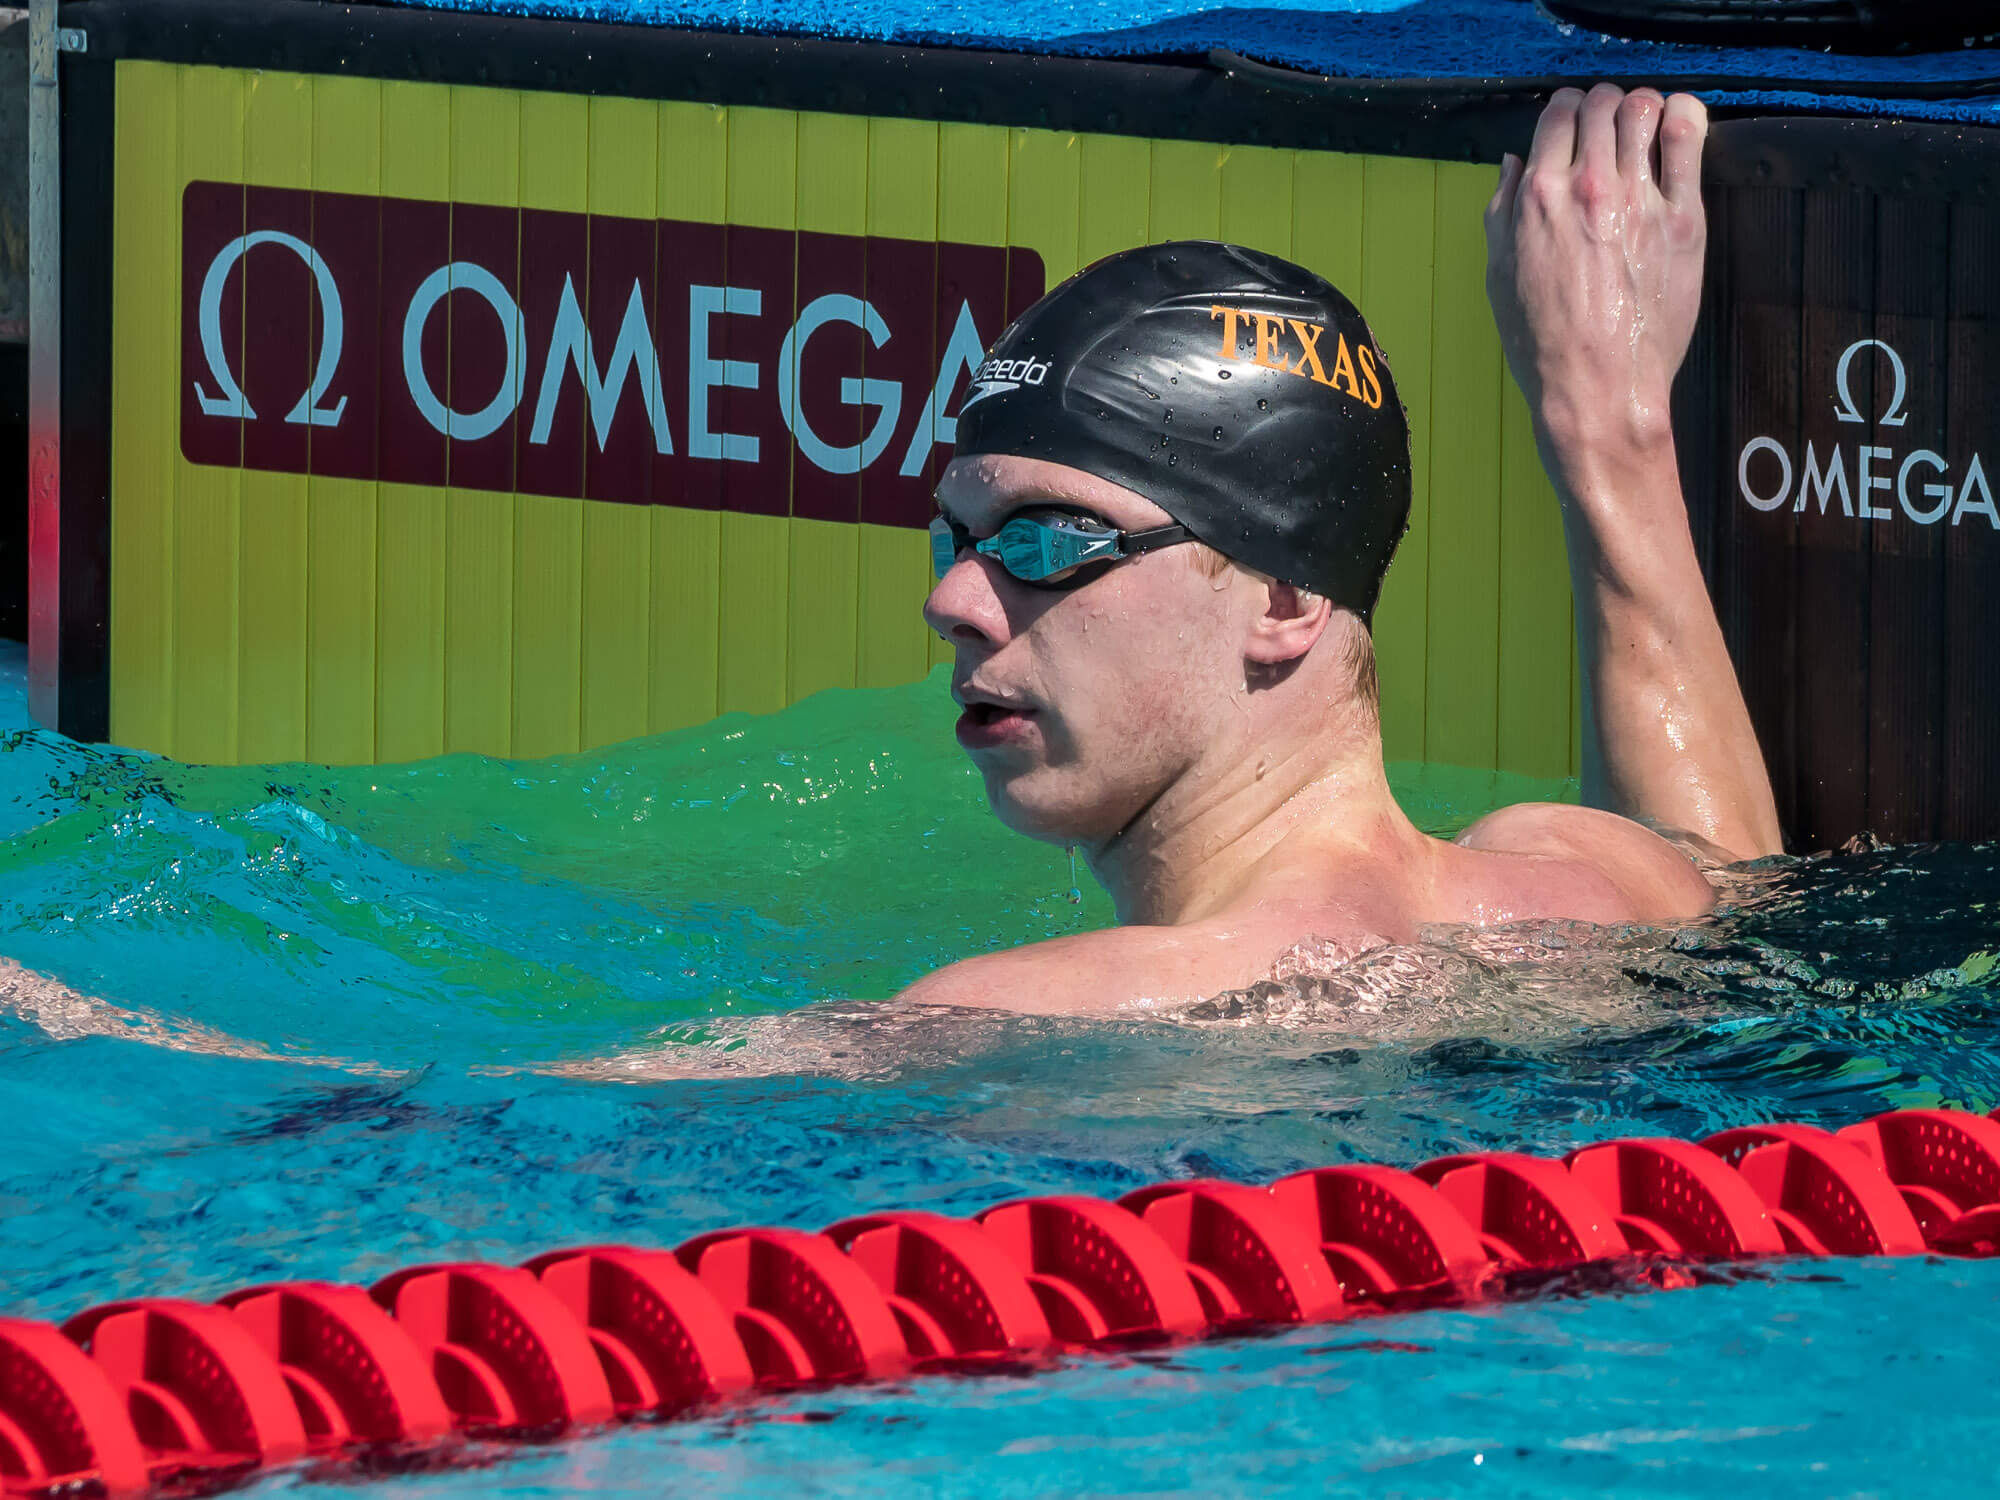 Psych Sheets For TYR Pro Swim Series at Clovis Released: Townley Haas